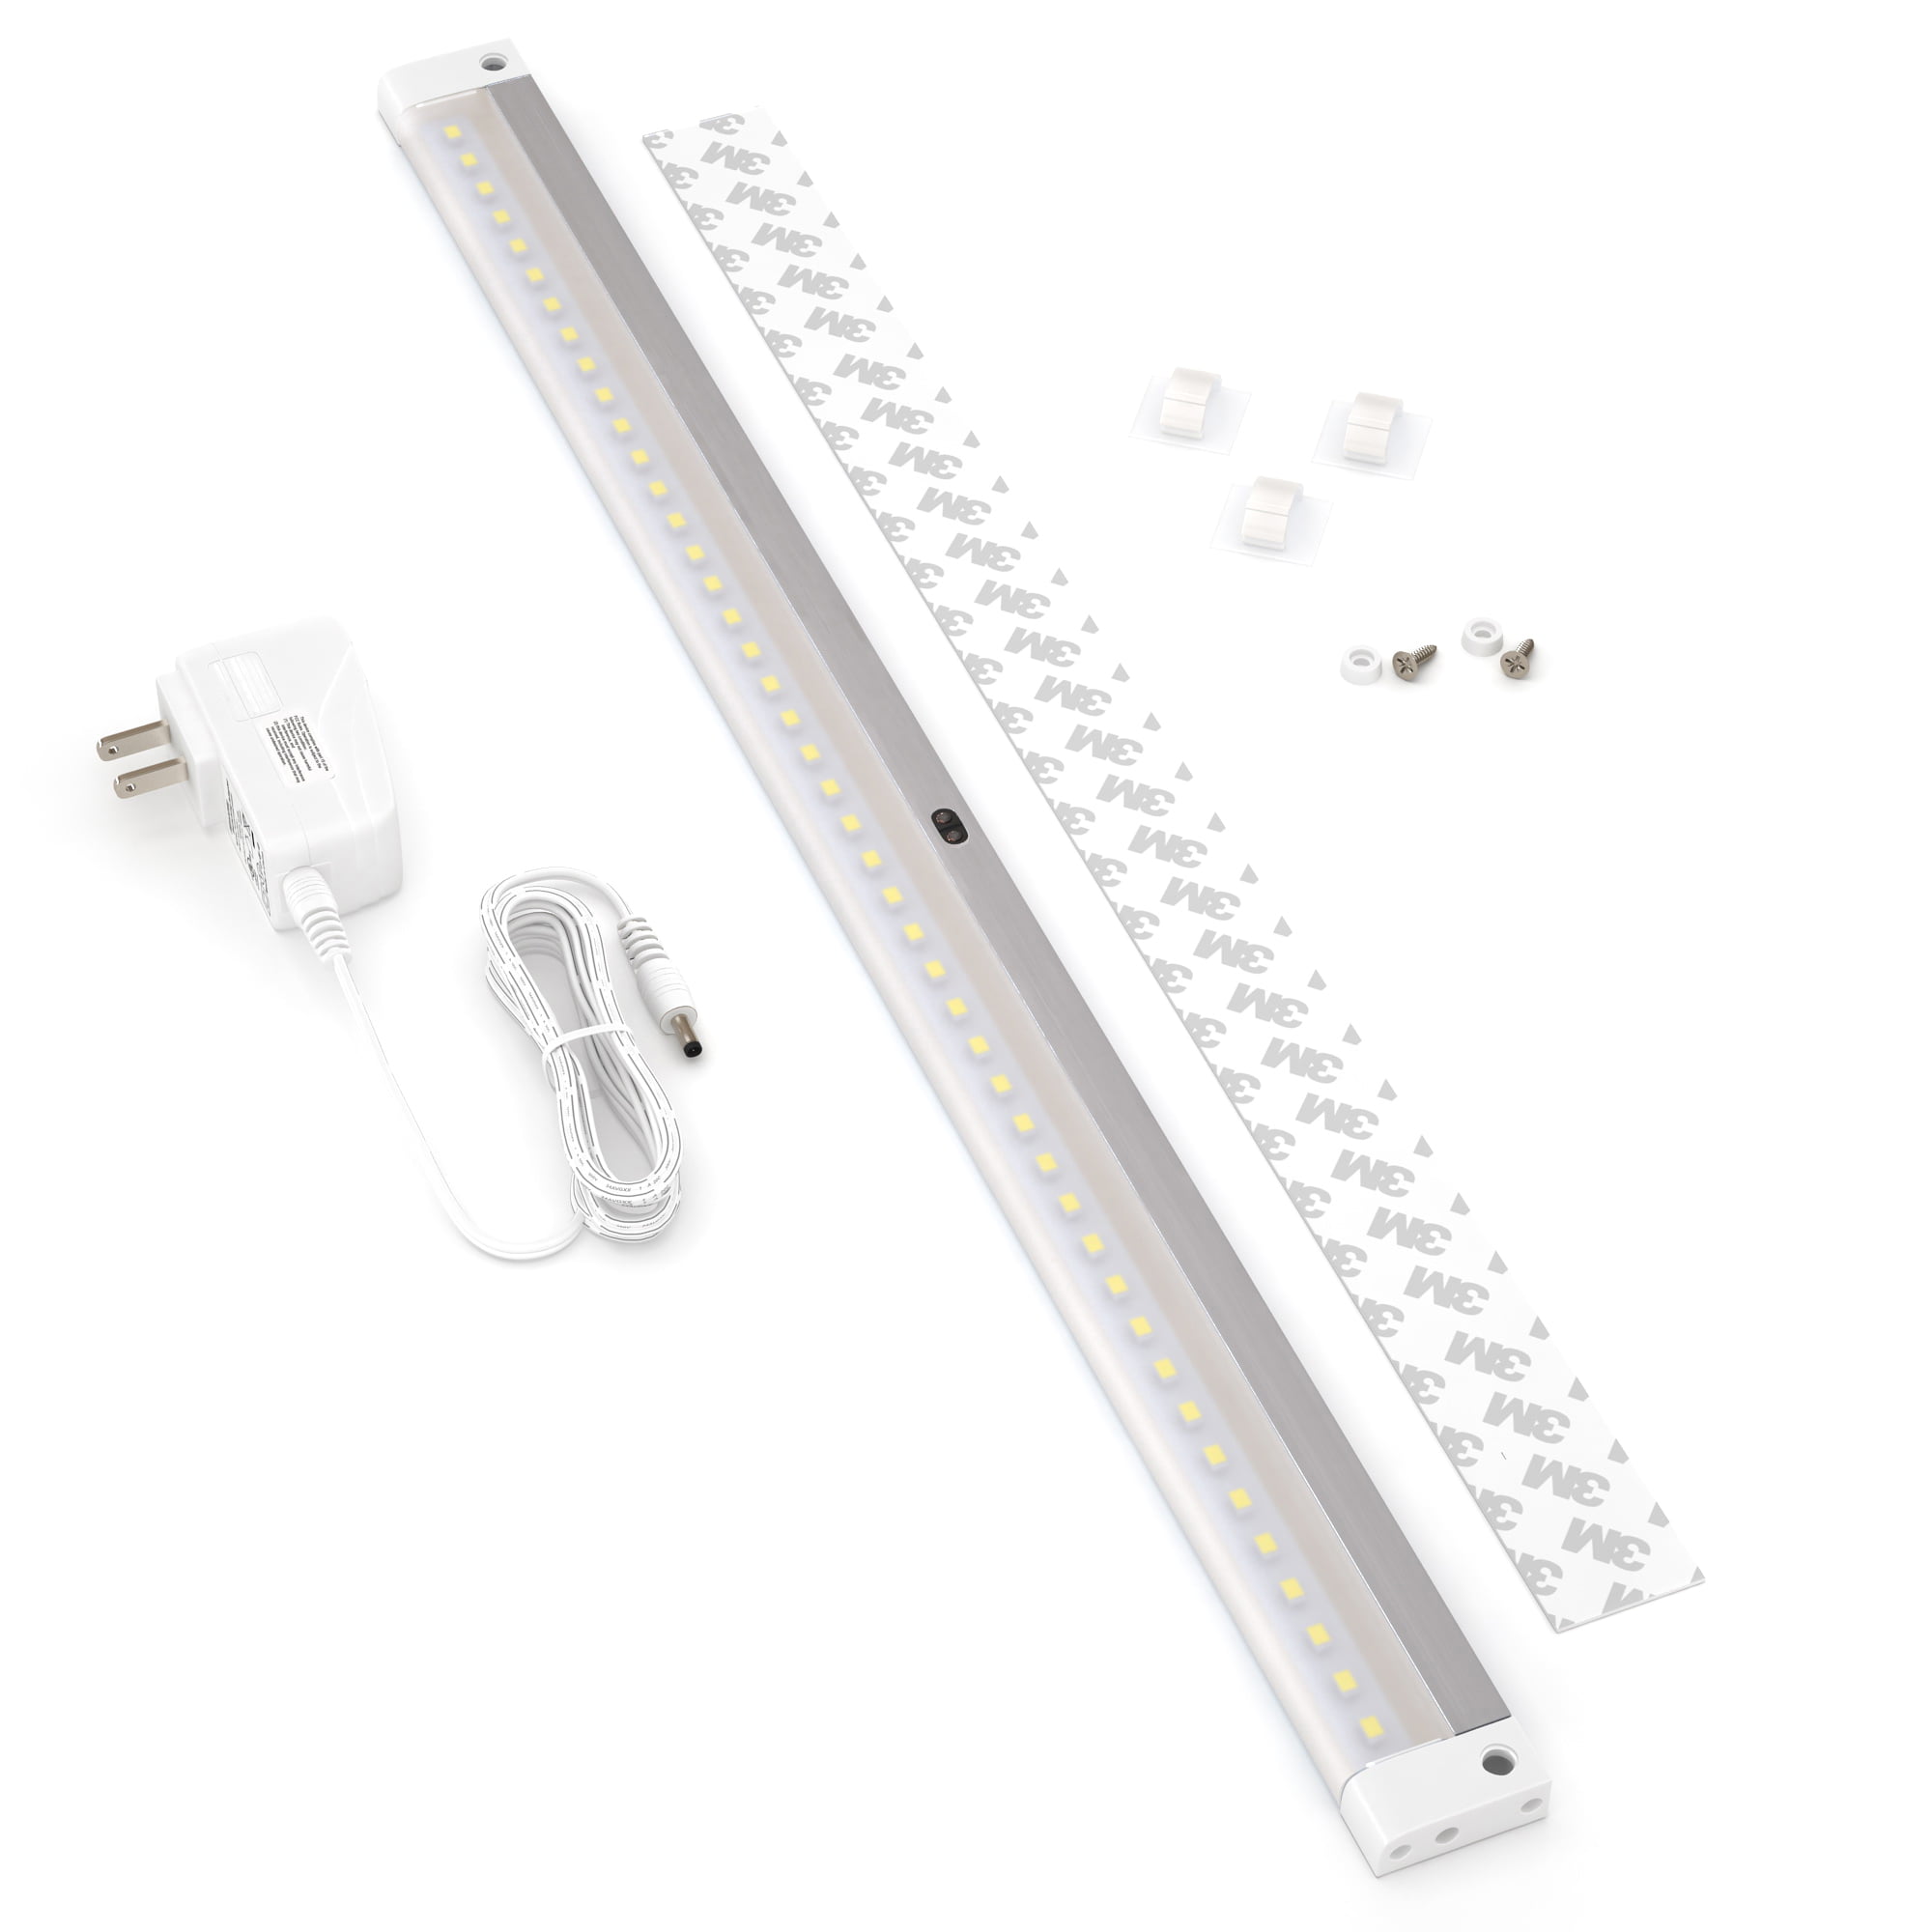 Cool White EShine White 3 Panels 40 inch LED Dimmable Under Cabinet Lighting 